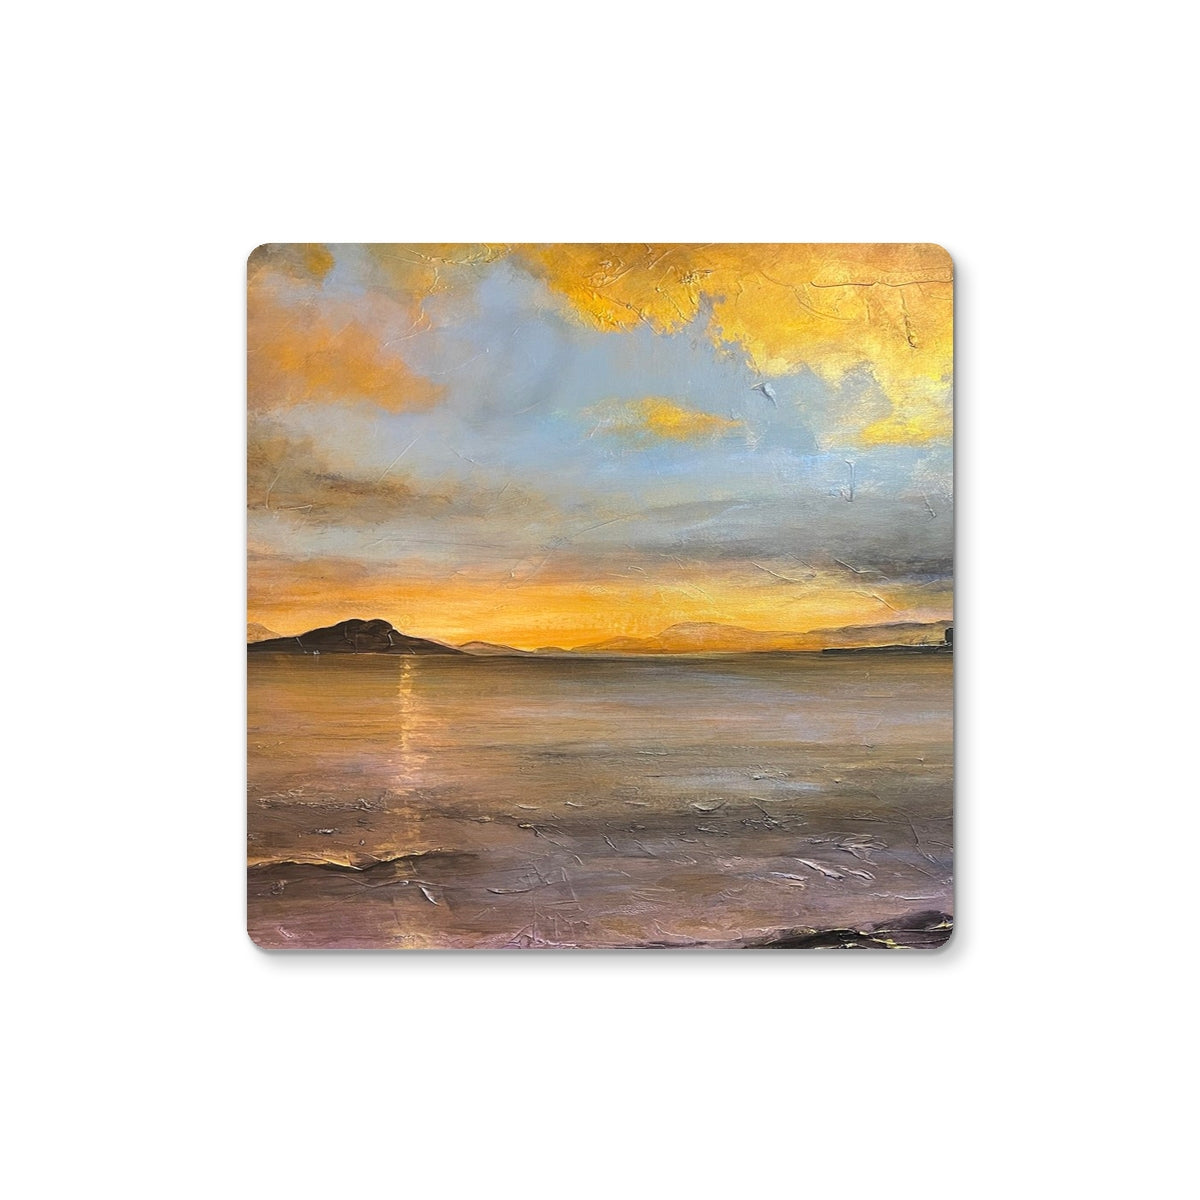 Loch Linnhe Sunset Art Gifts Coaster-Coasters-Scottish Lochs & Mountains Art Gallery-Single Coaster-Paintings, Prints, Homeware, Art Gifts From Scotland By Scottish Artist Kevin Hunter